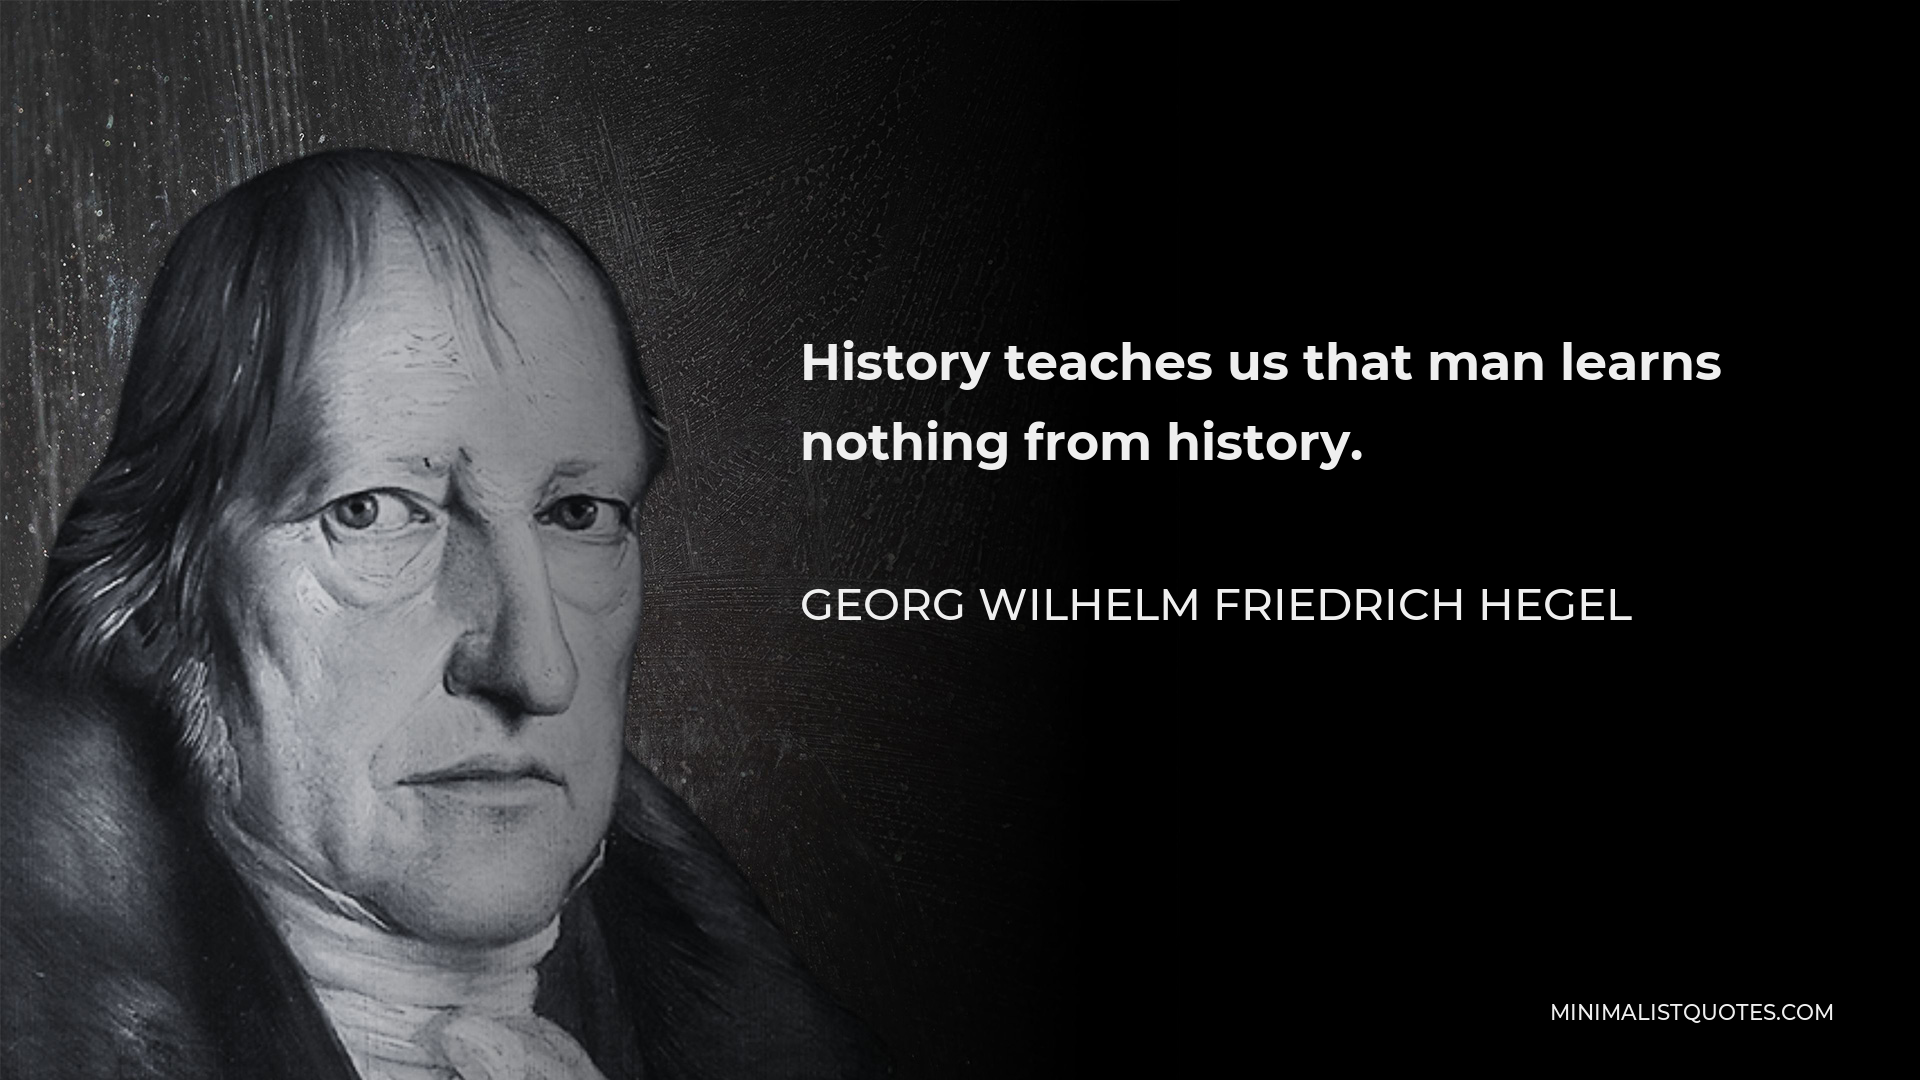 history teaches us that we learn nothing